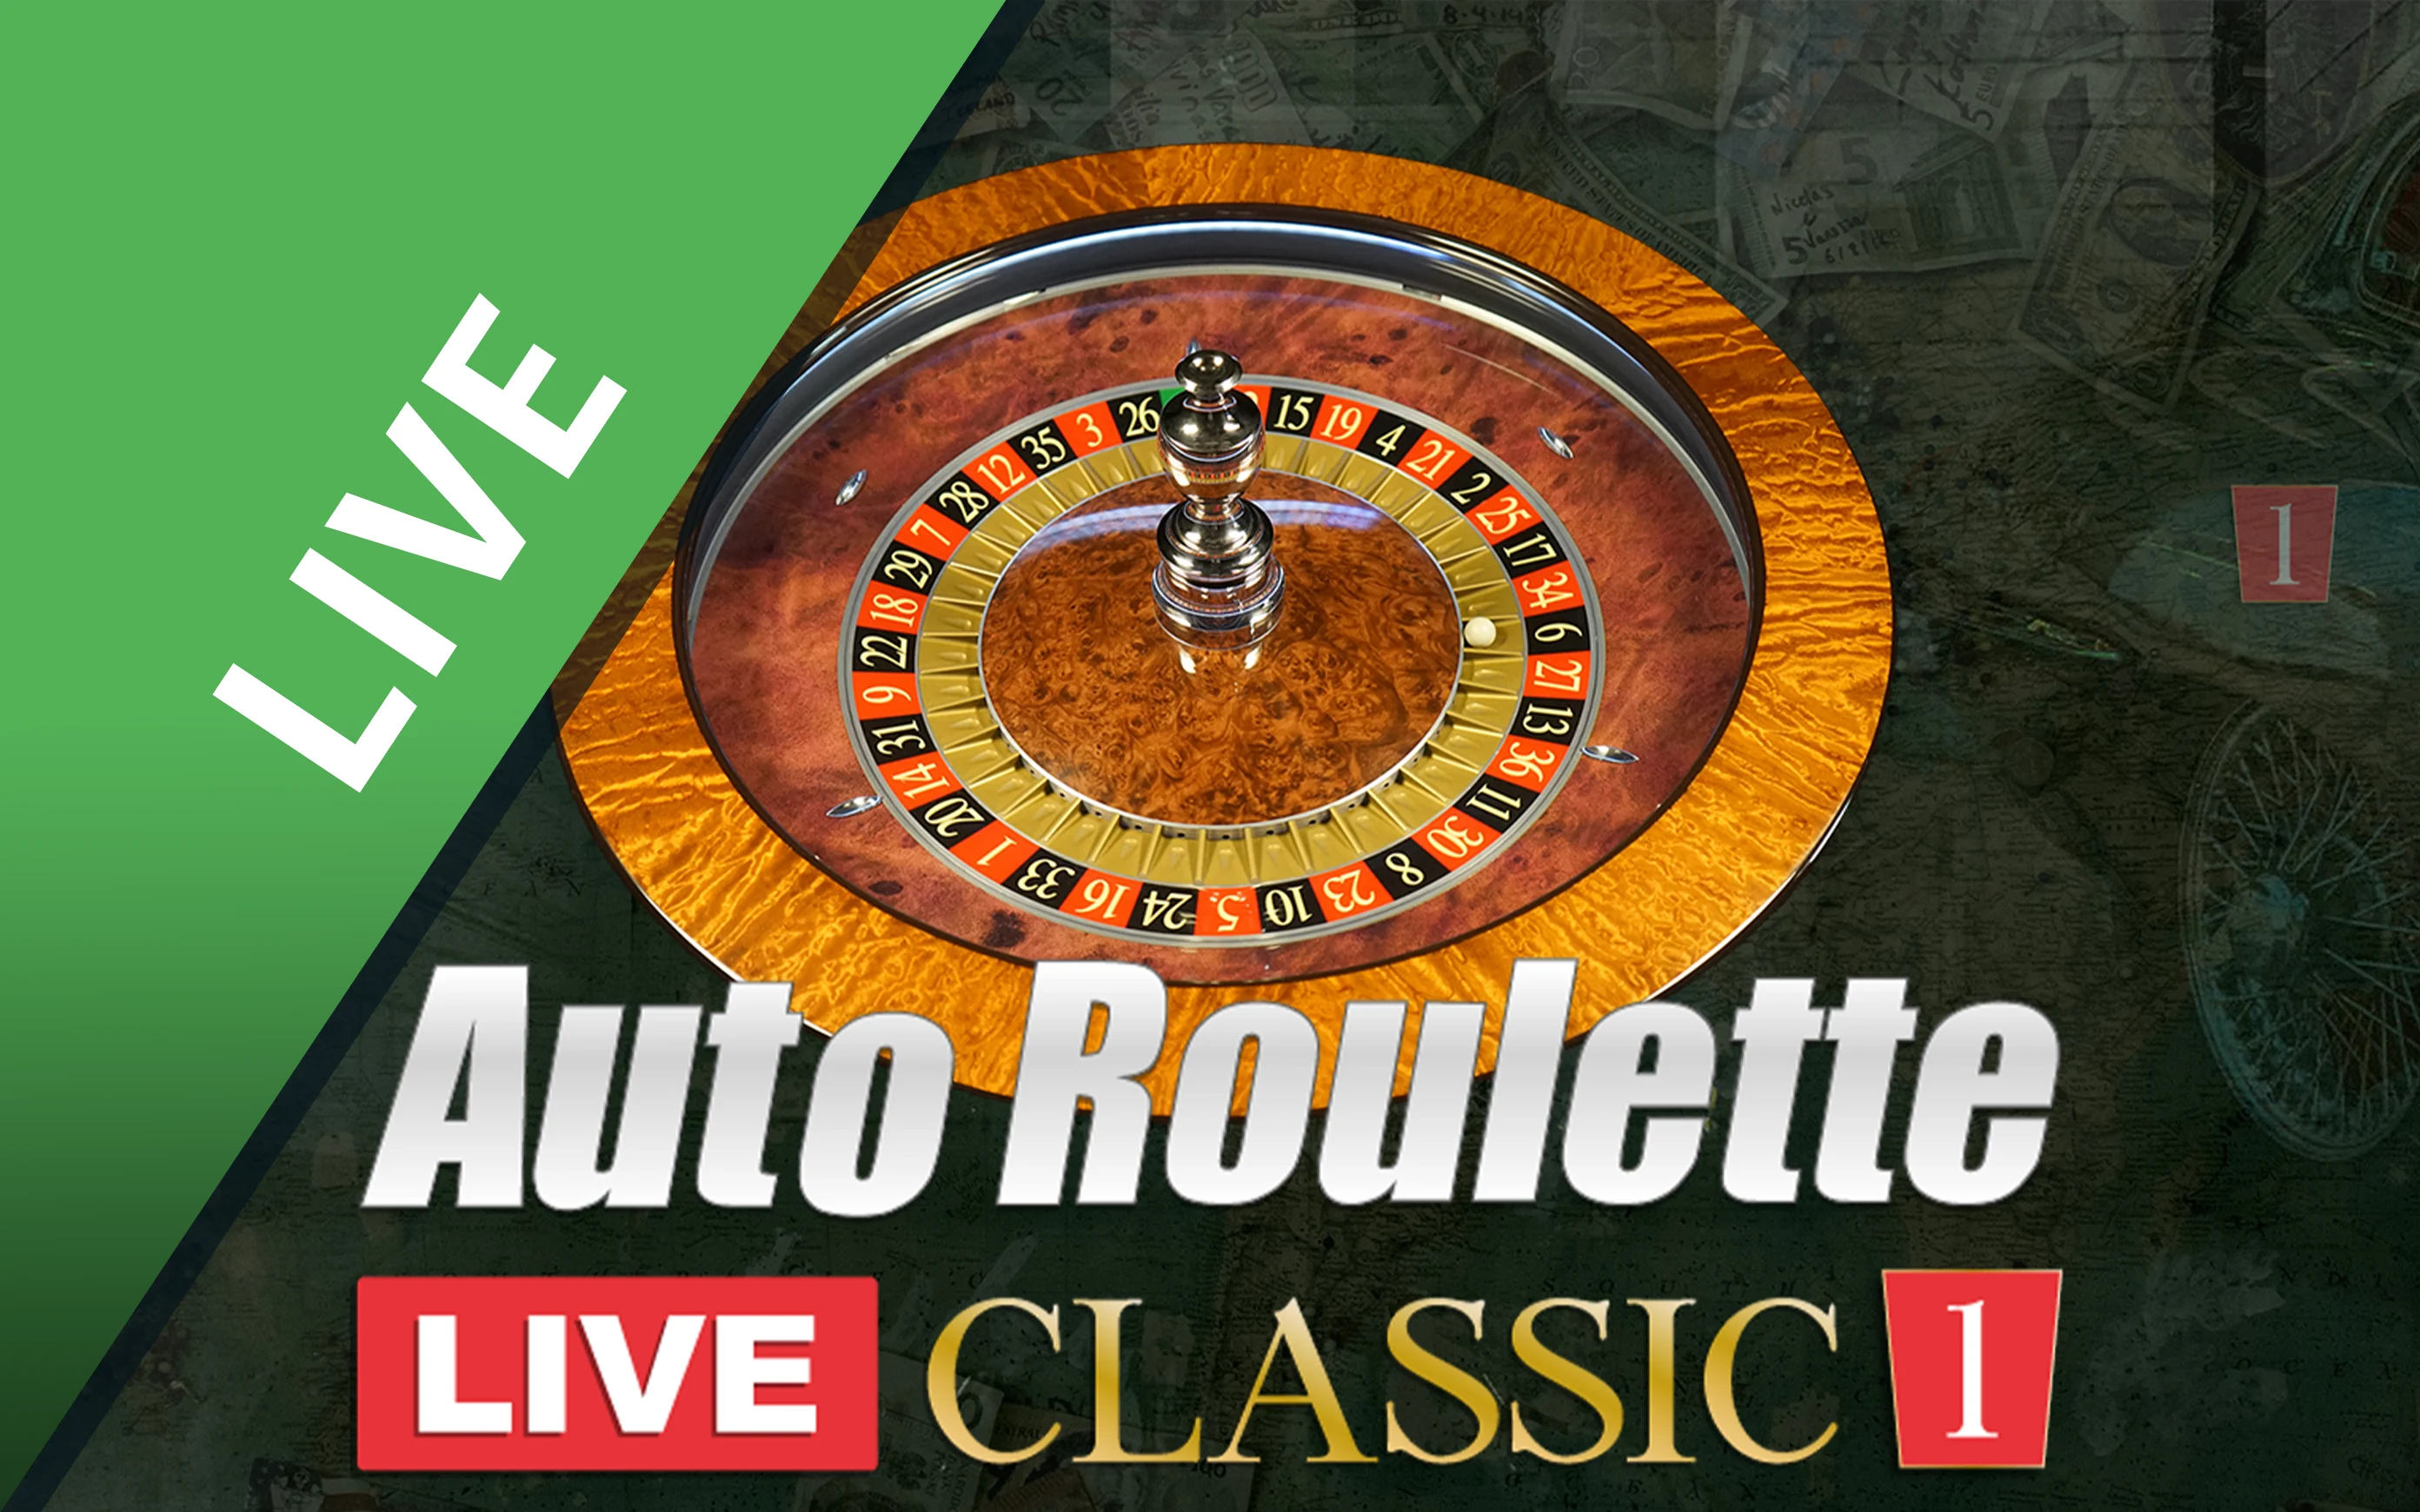 Play Classic Roulette 1 on Starcasino.be online casino